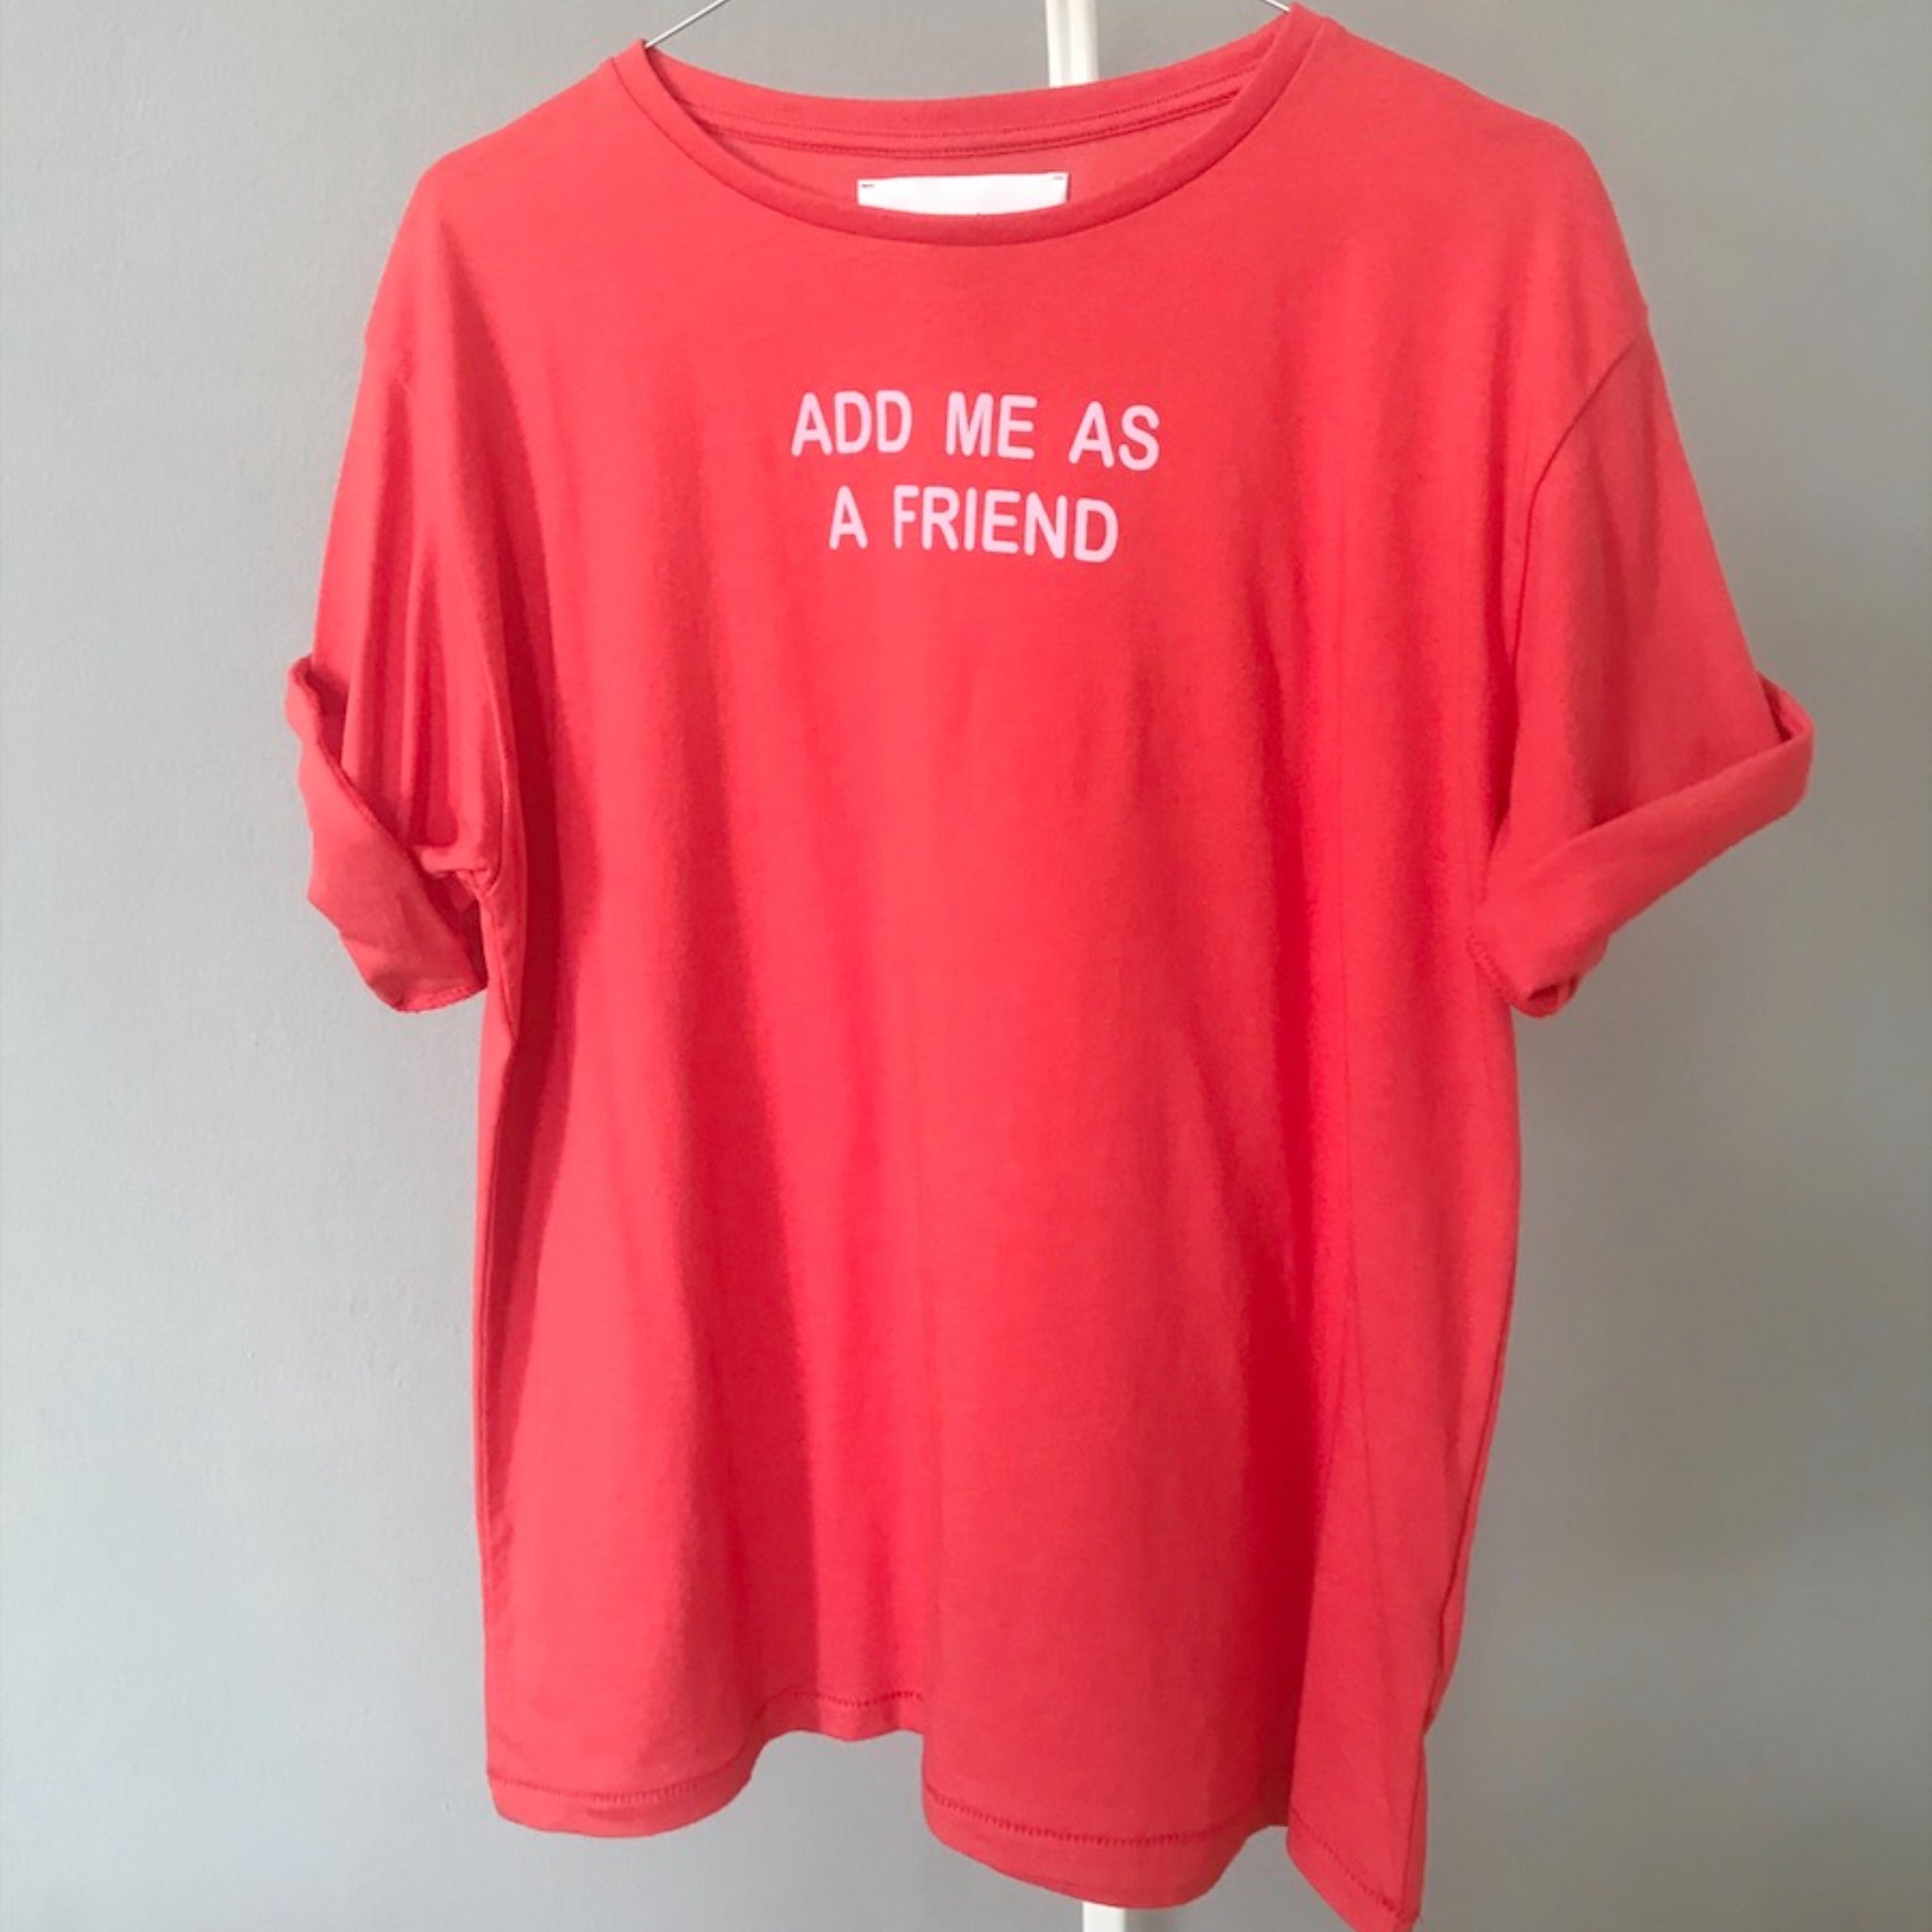 Another Brand T-Shirt "Add Me"